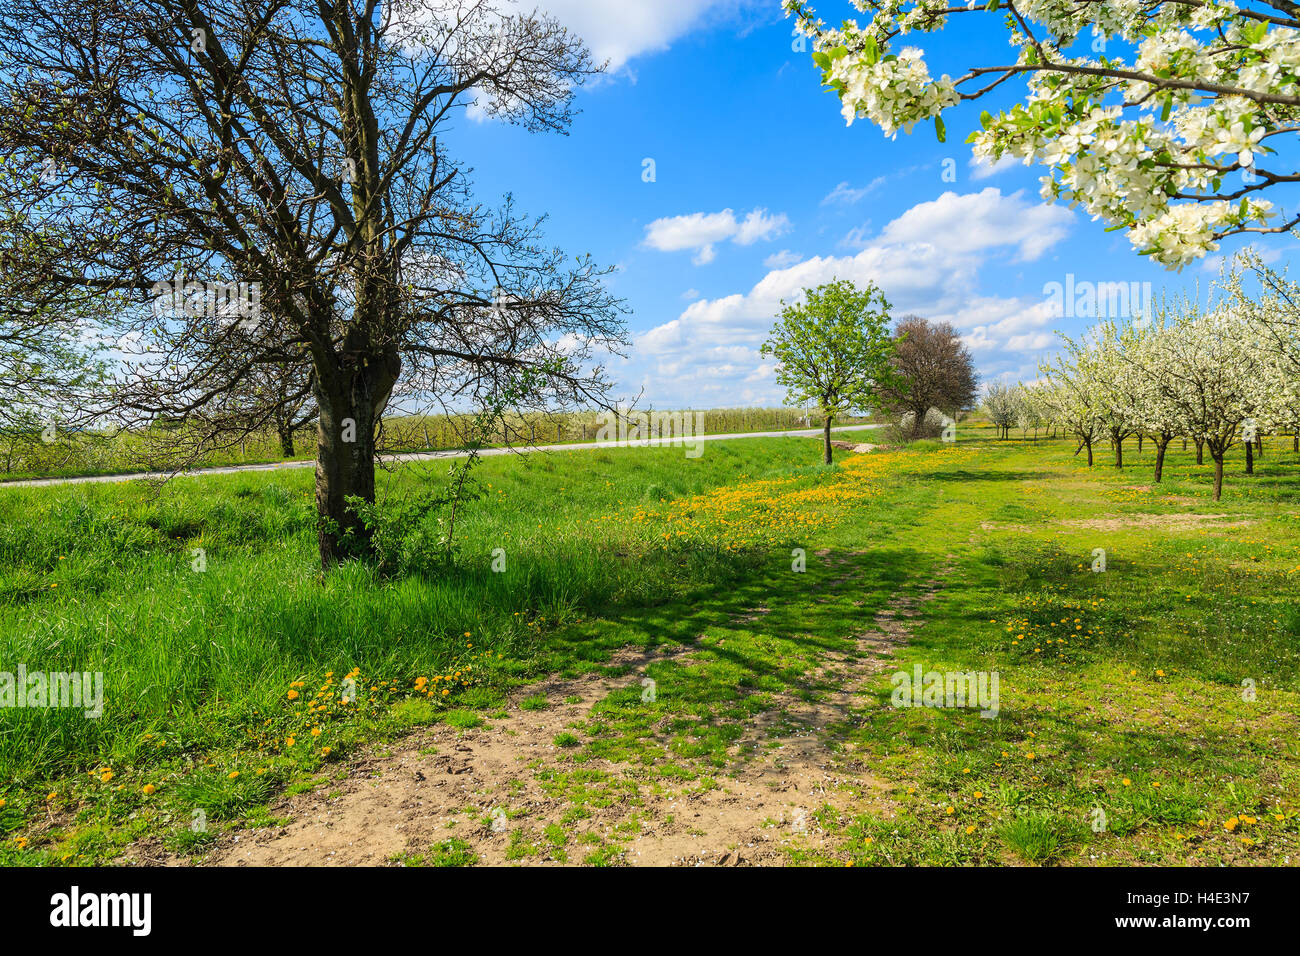 Yellow spring flowers on green filed with blooming trees along rural road, Kotuszow village, Poland Stock Photo